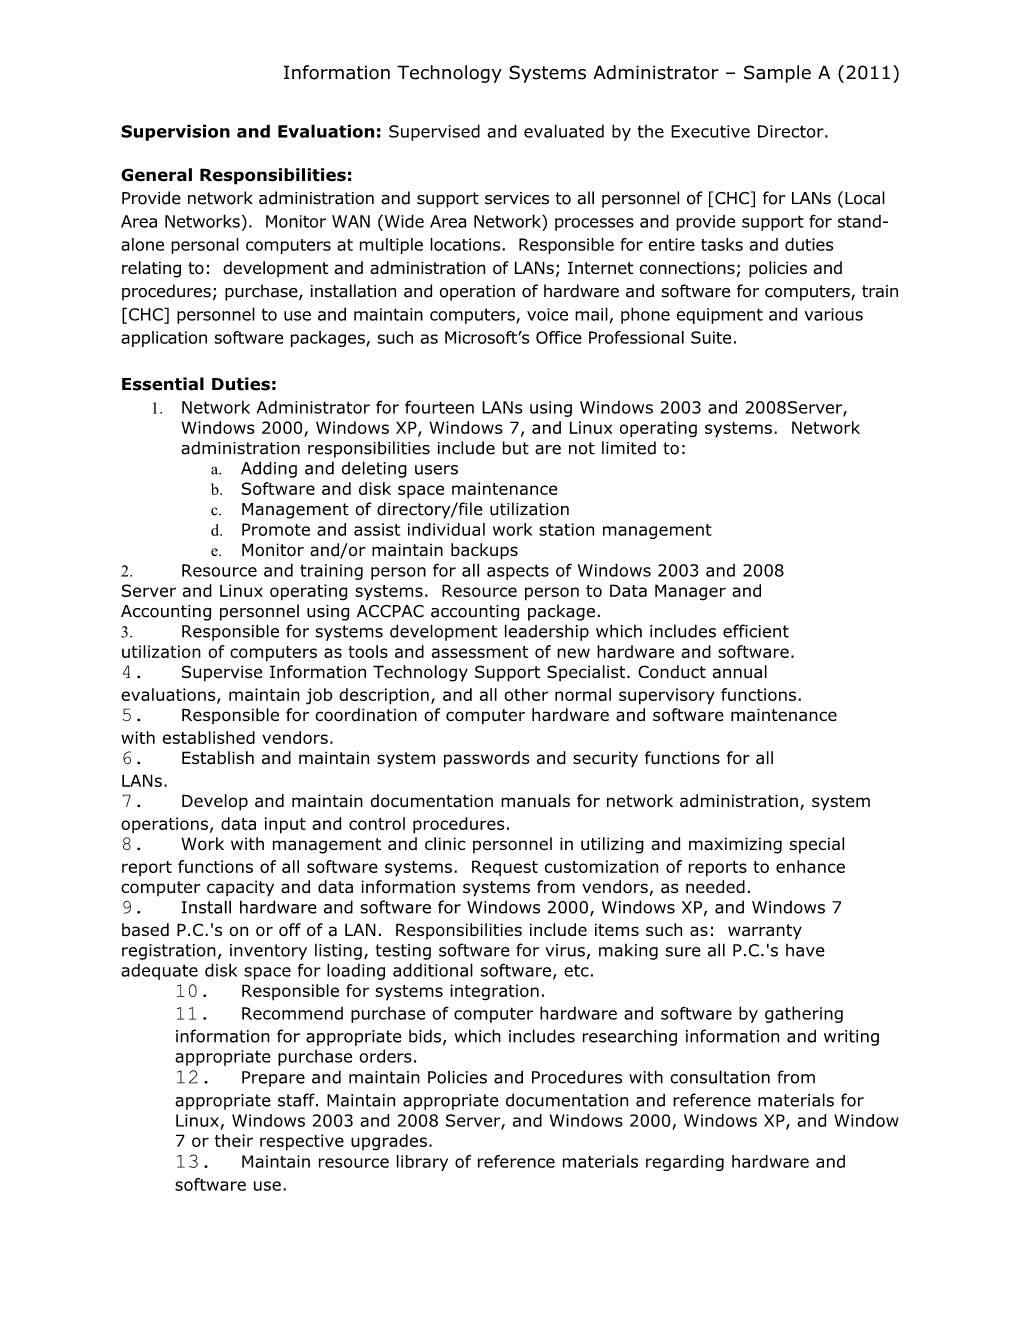 Information Technology Systems Administrator Sample a (2011)